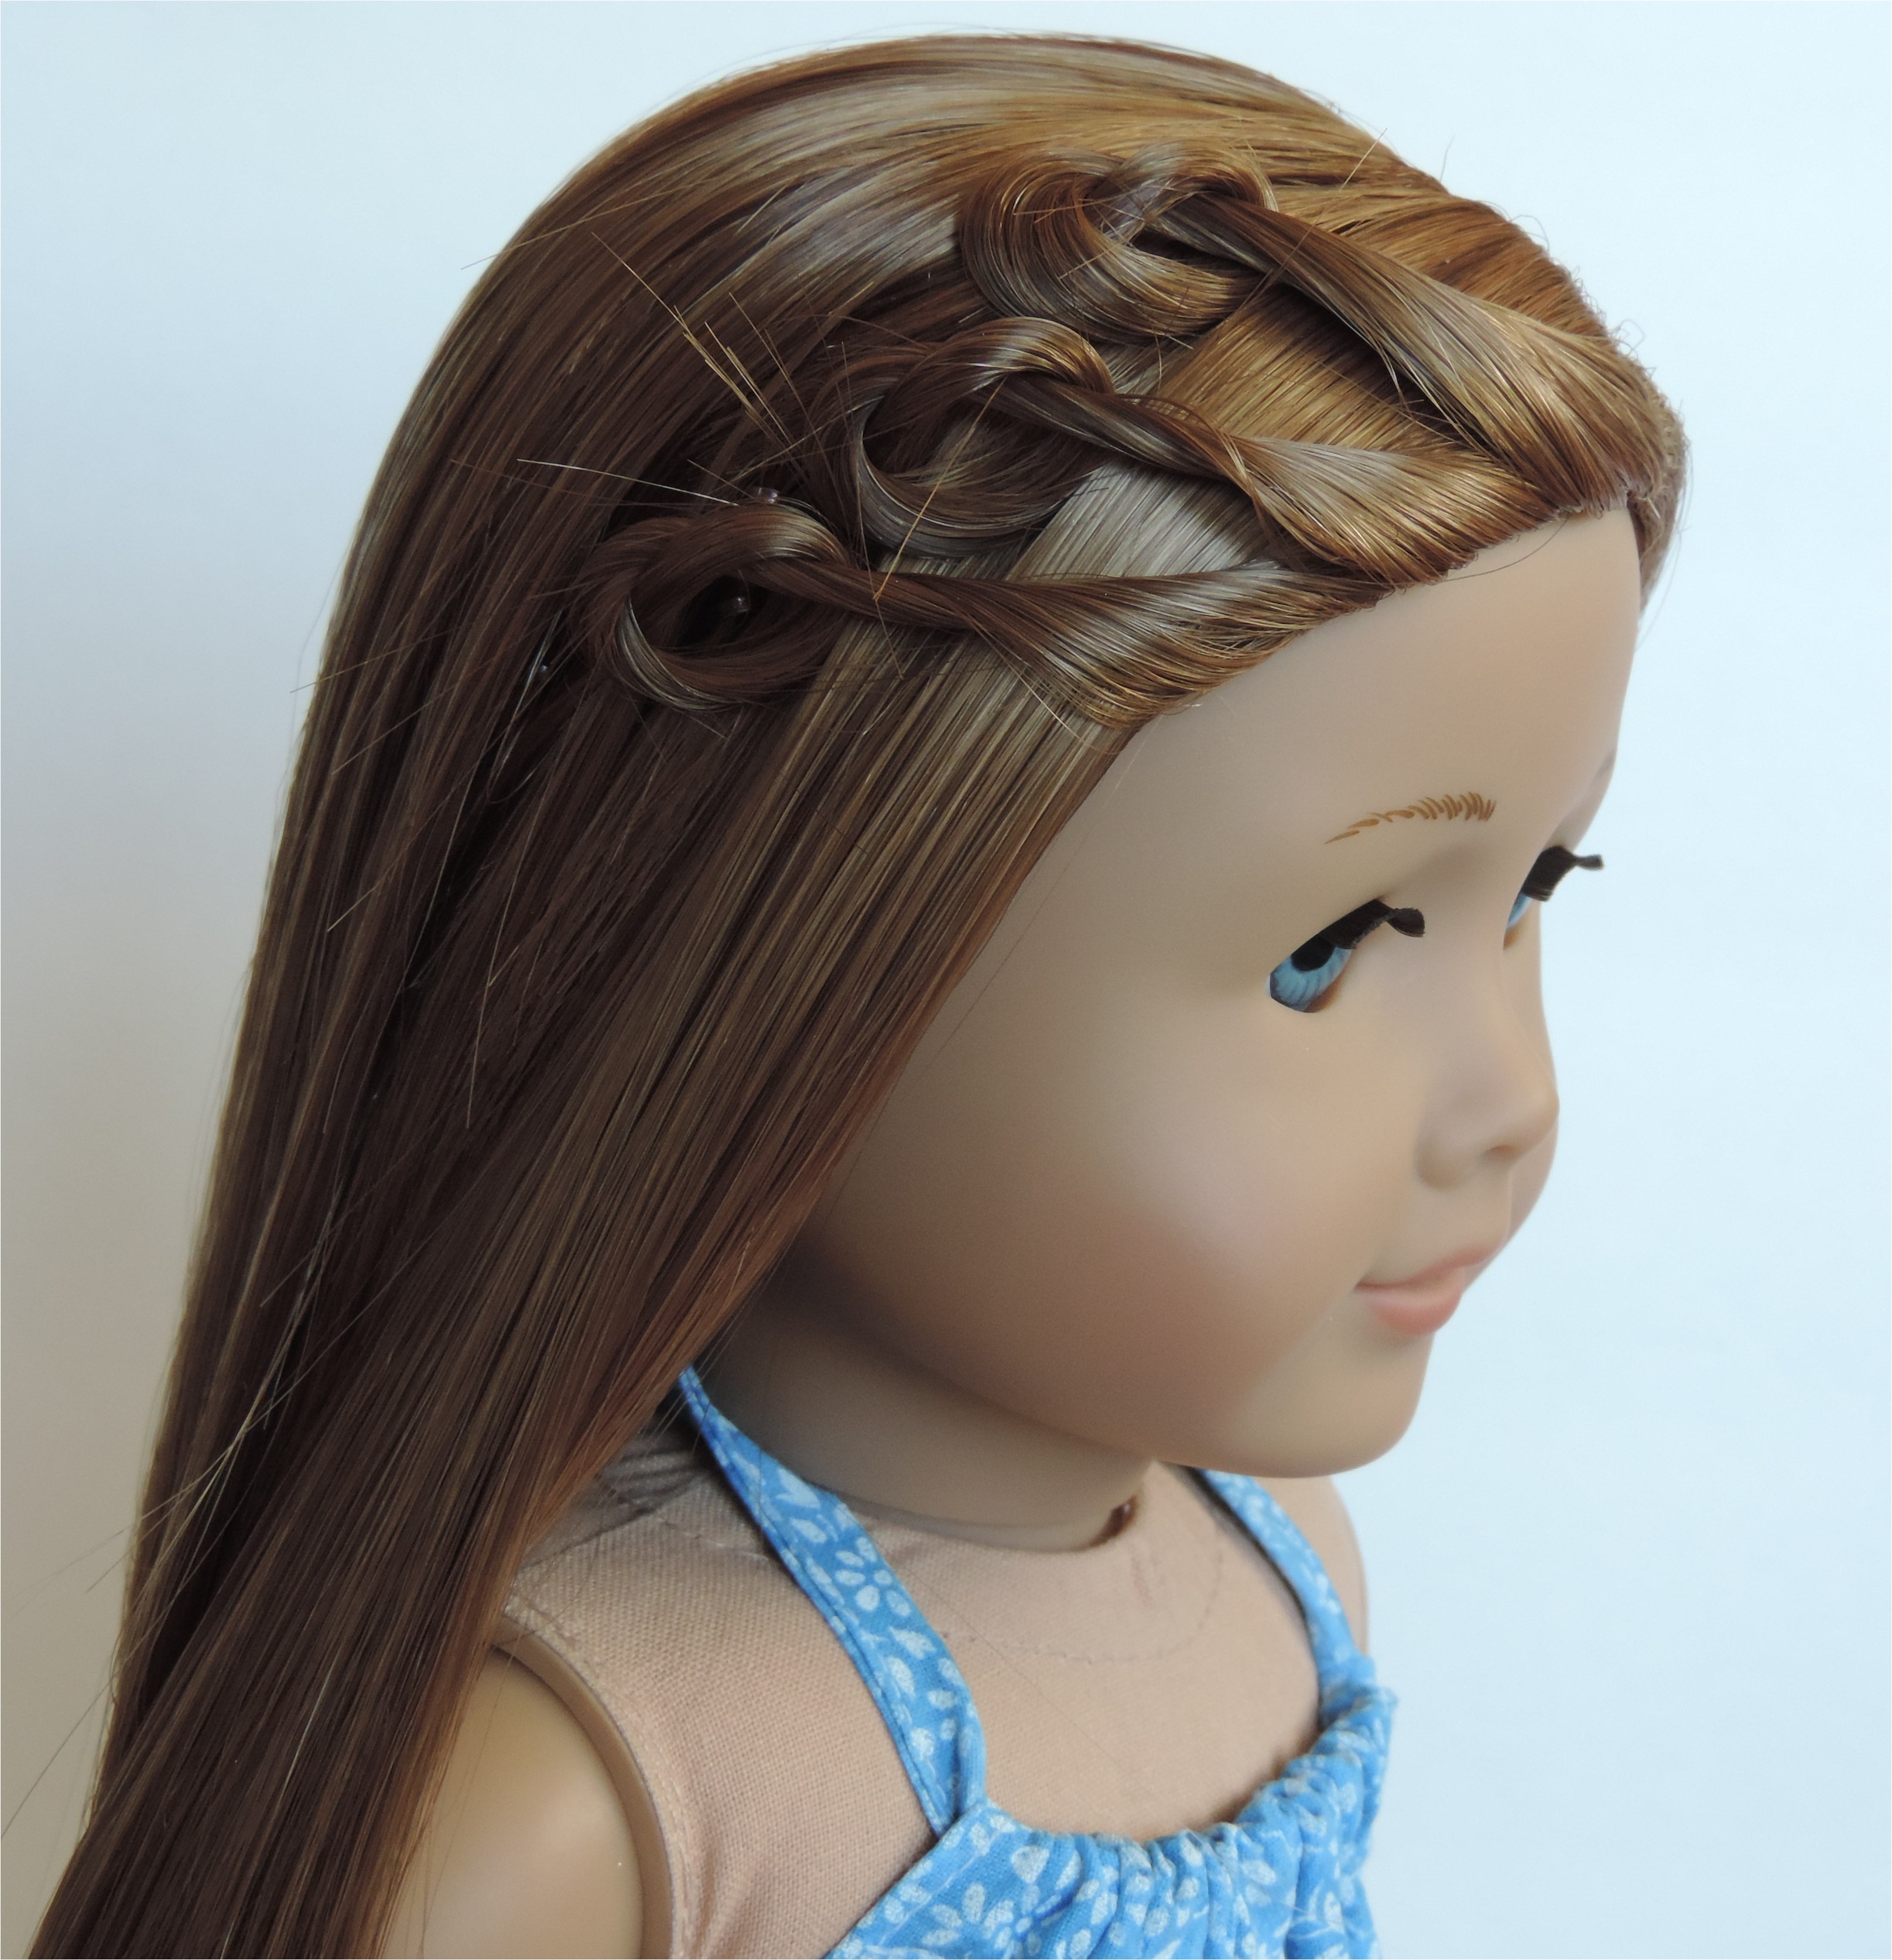 Hairstyles for American Girl Dolls with Curly Hair Beautiful Best American Girl Doll Hairstyles Image Collection